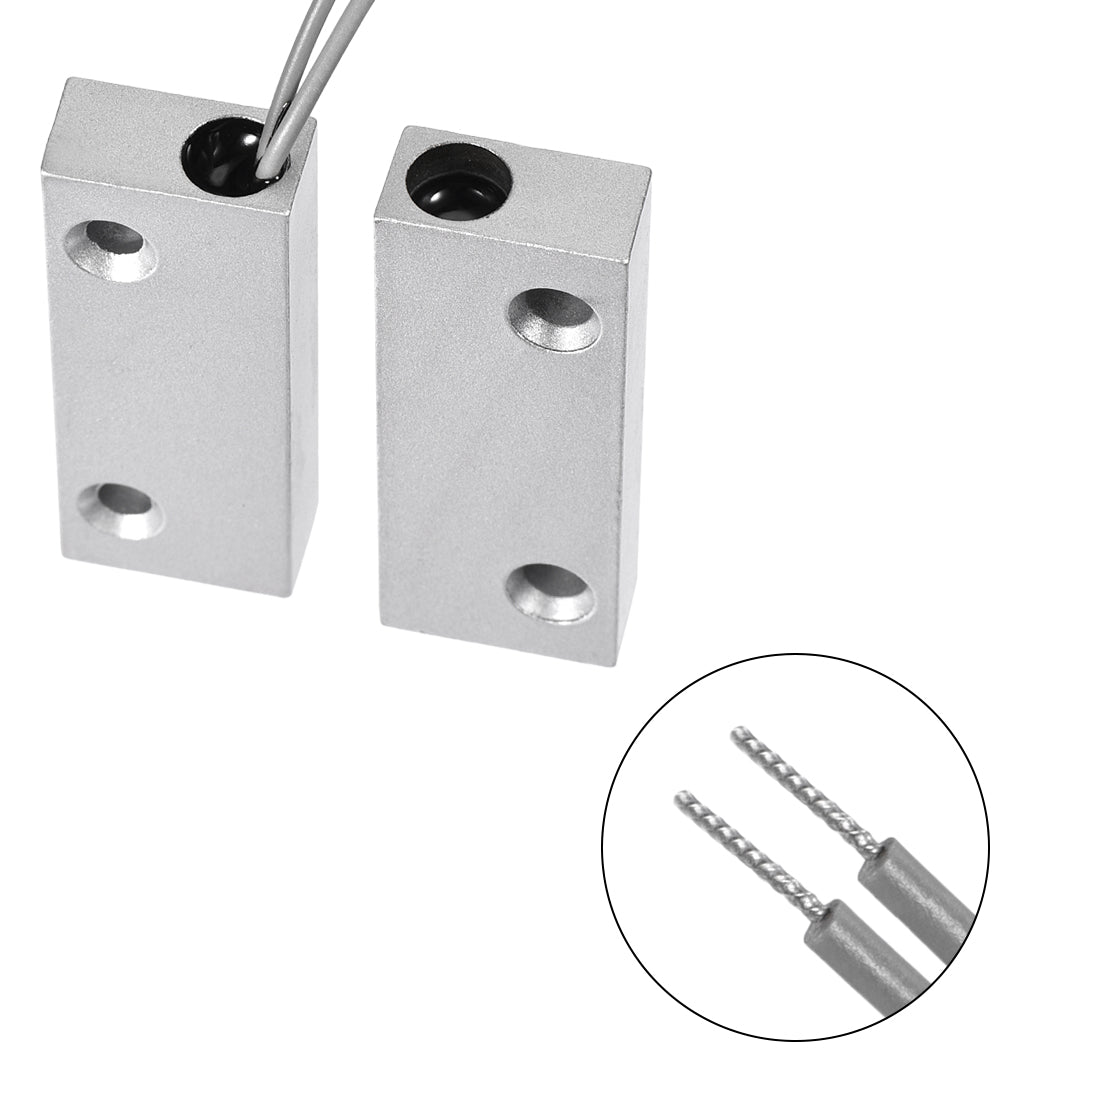 uxcell Uxcell MC-52 NO Rolling Gate Door Contact Magnetic Reed Switch 2Set